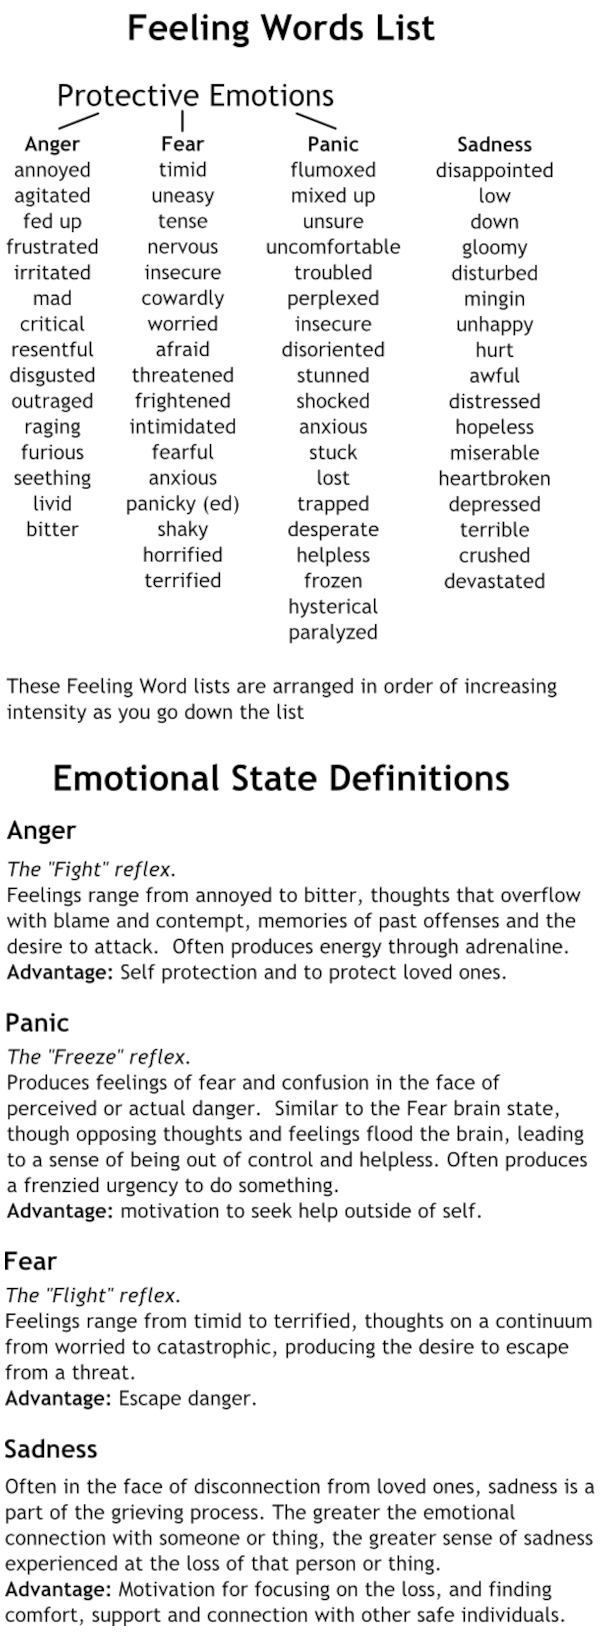 Image of the Feeling Word List from the Protective Brain States